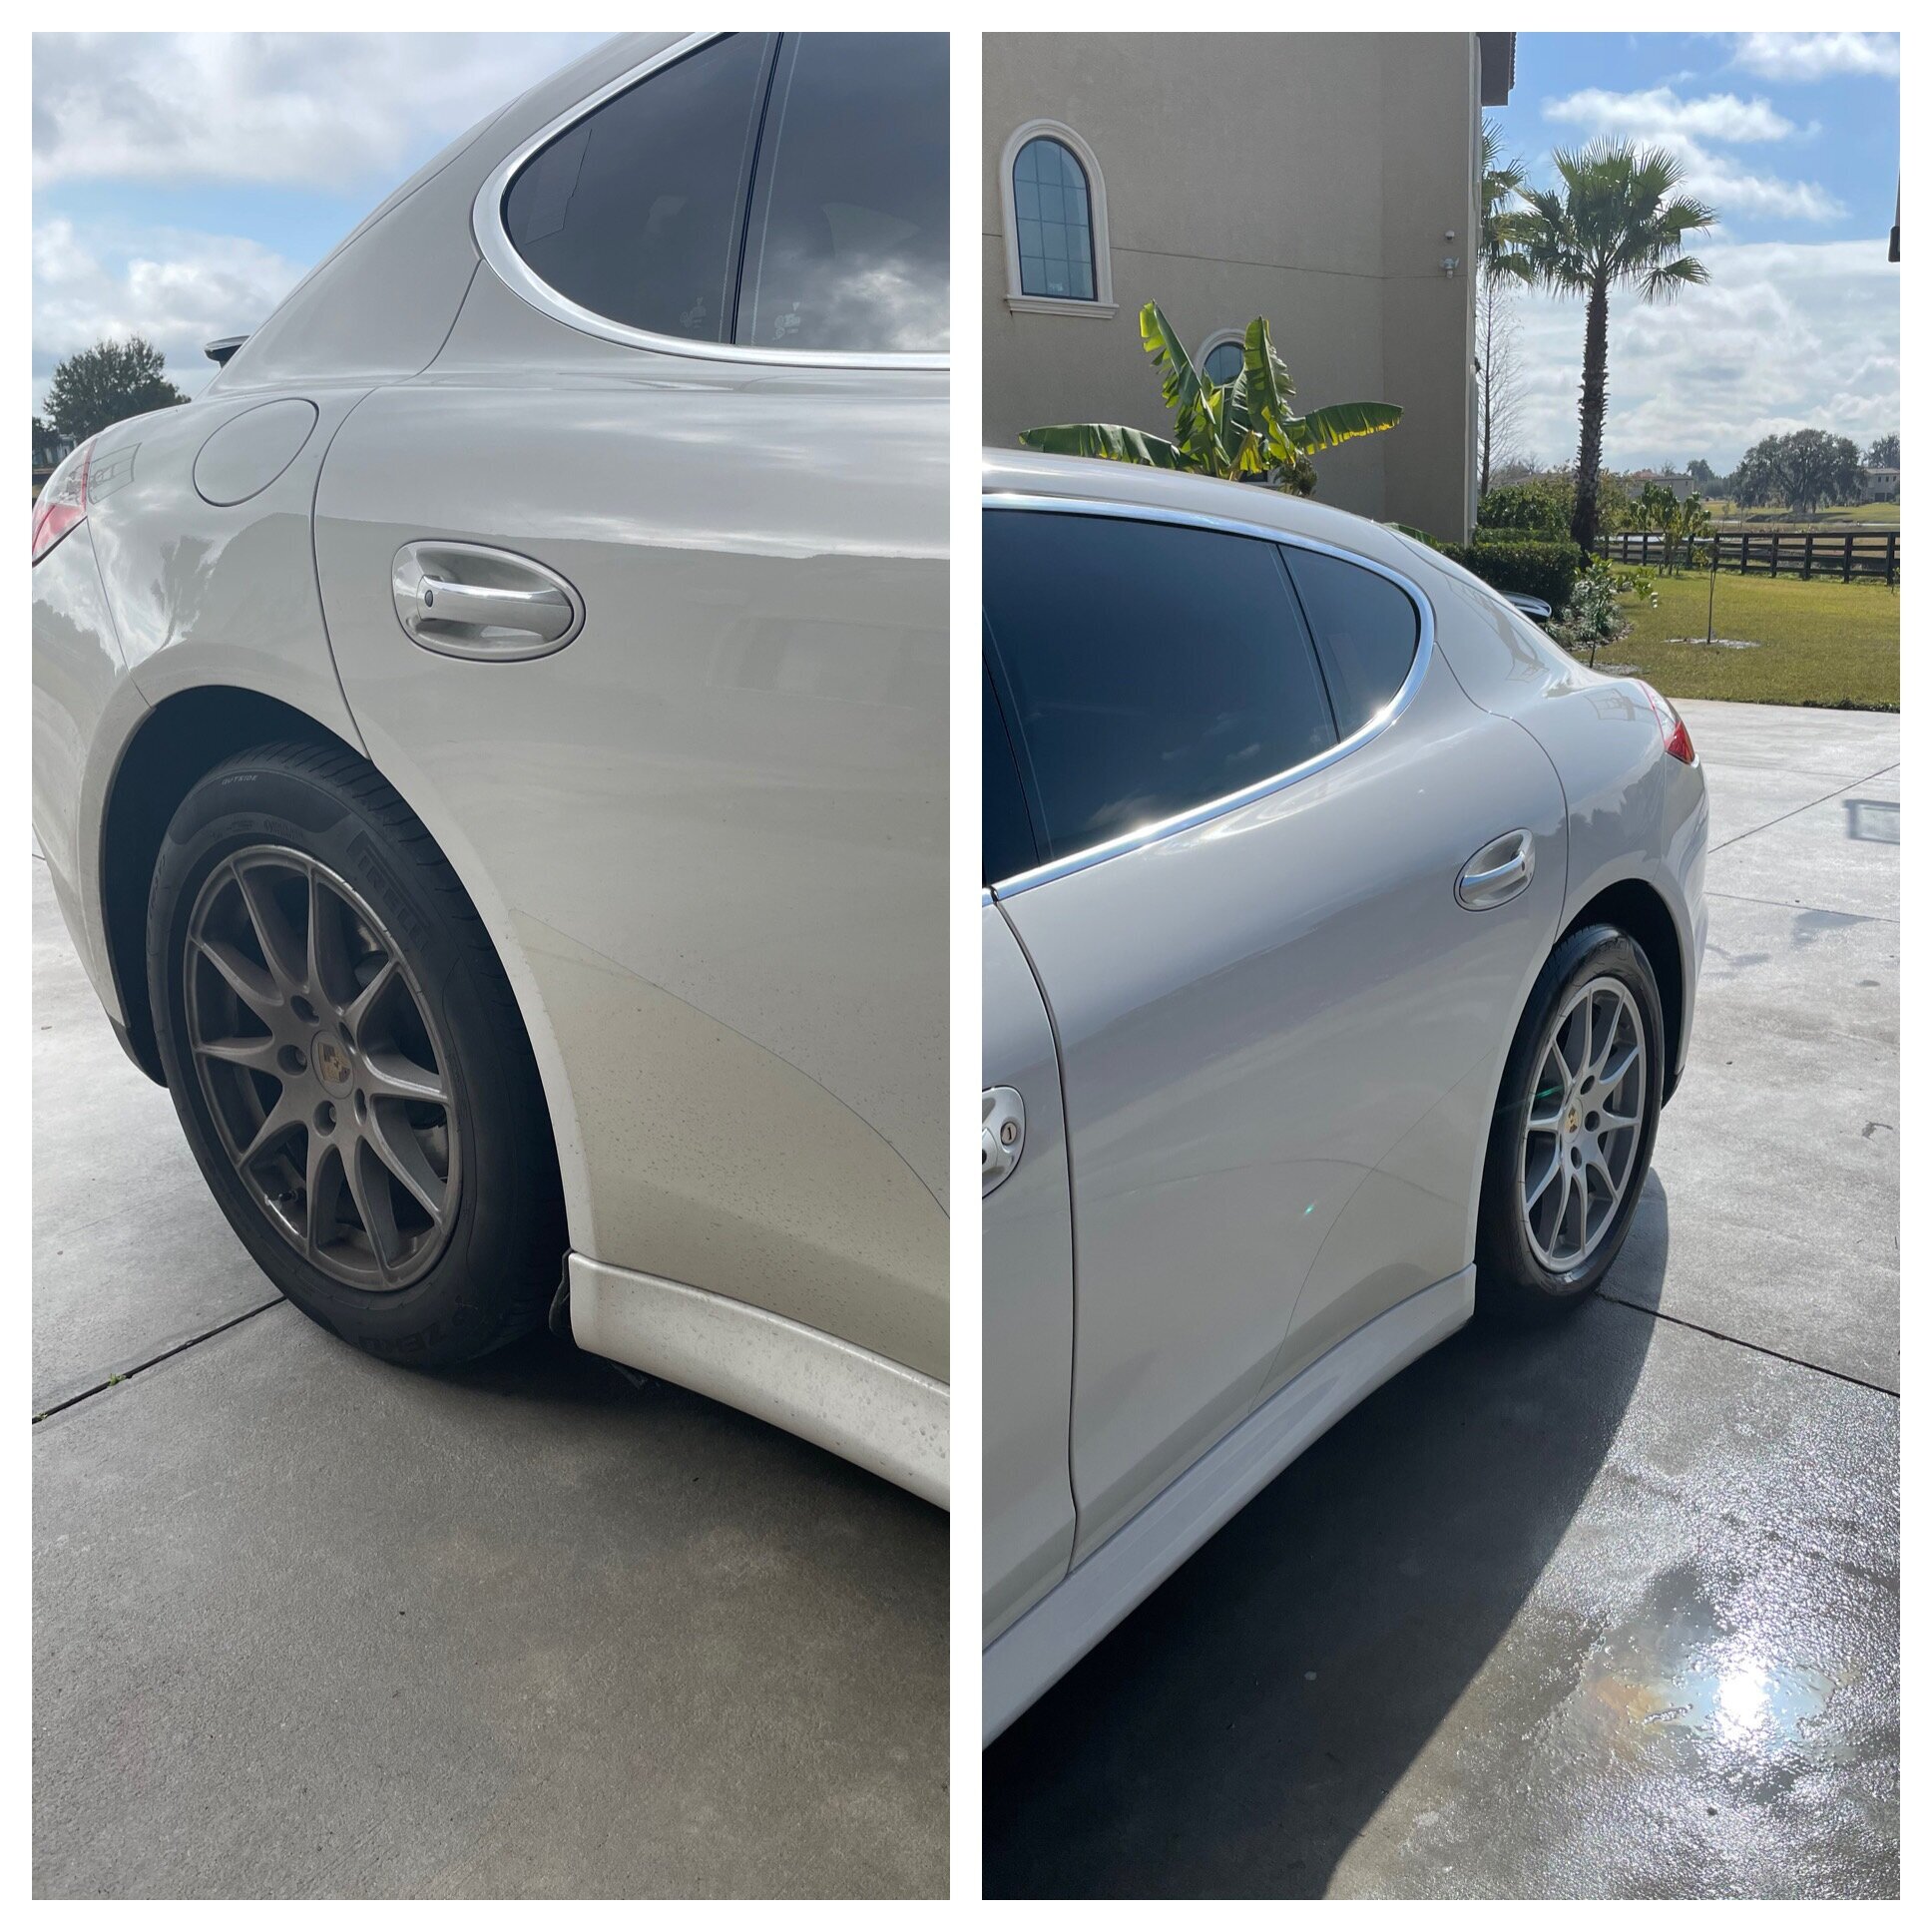 Before/After Auto Detailing Service on a Porsche